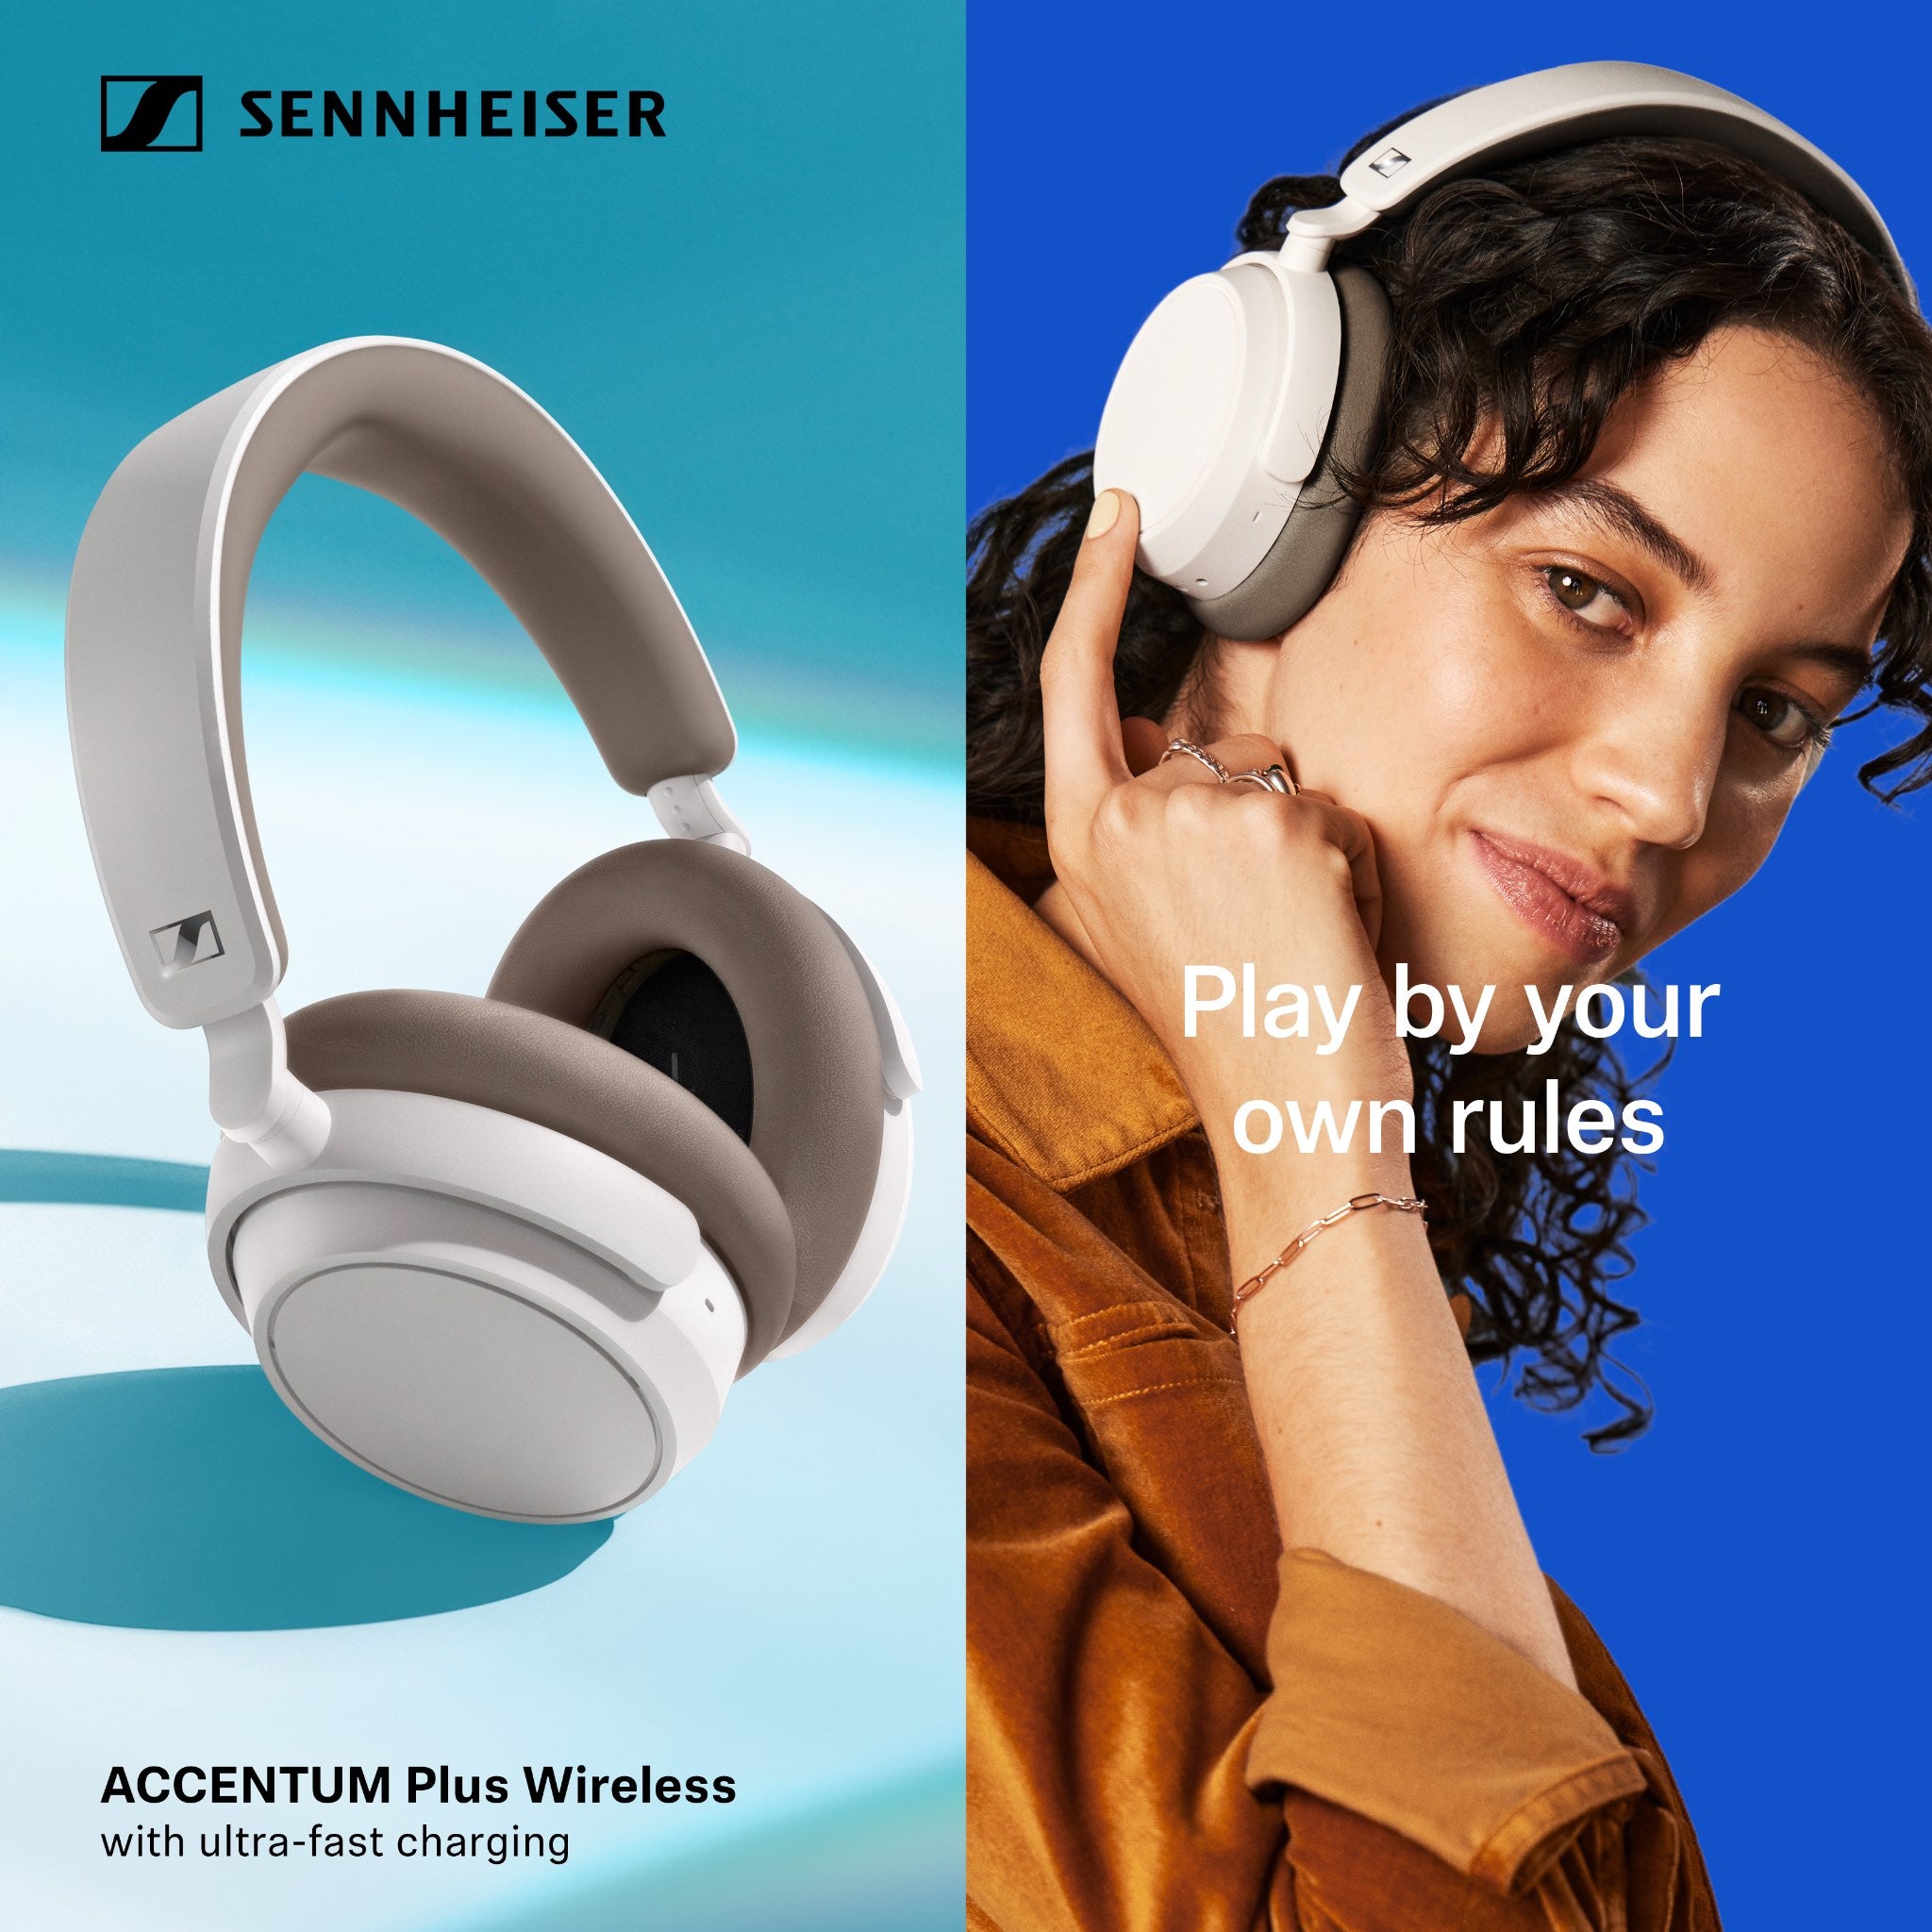 Human wearing Accentum Plus highlighting touch control with Sennheiser logo